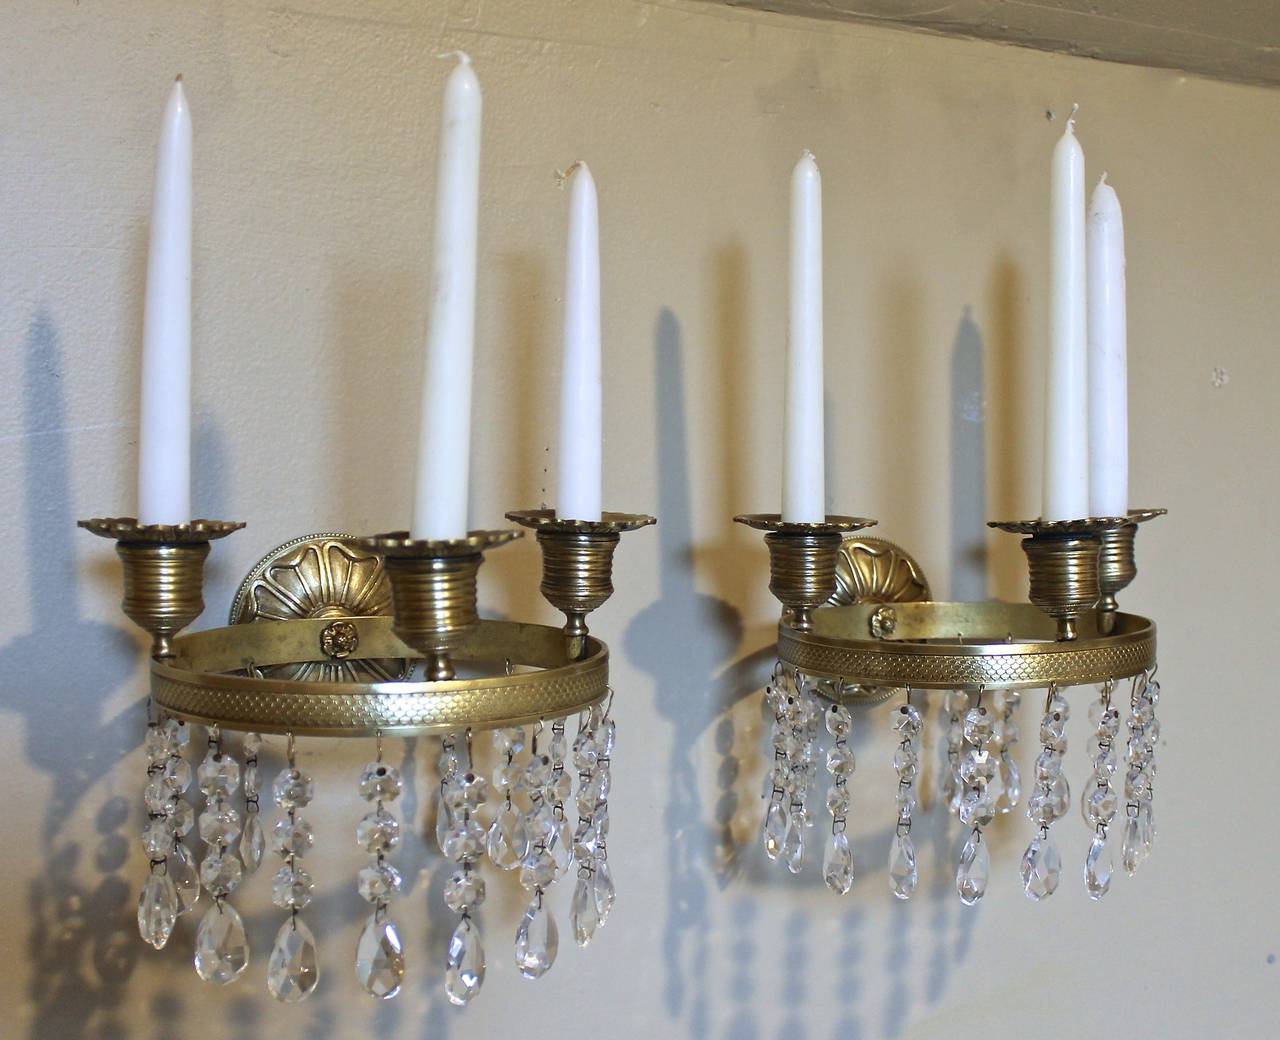 Pair of early French Empire brass and crystal wall sconces with three candle cups and removable drip pans on knurled oval banding mounted to a round backplate. Nicely chased details and patina. Not electrified.